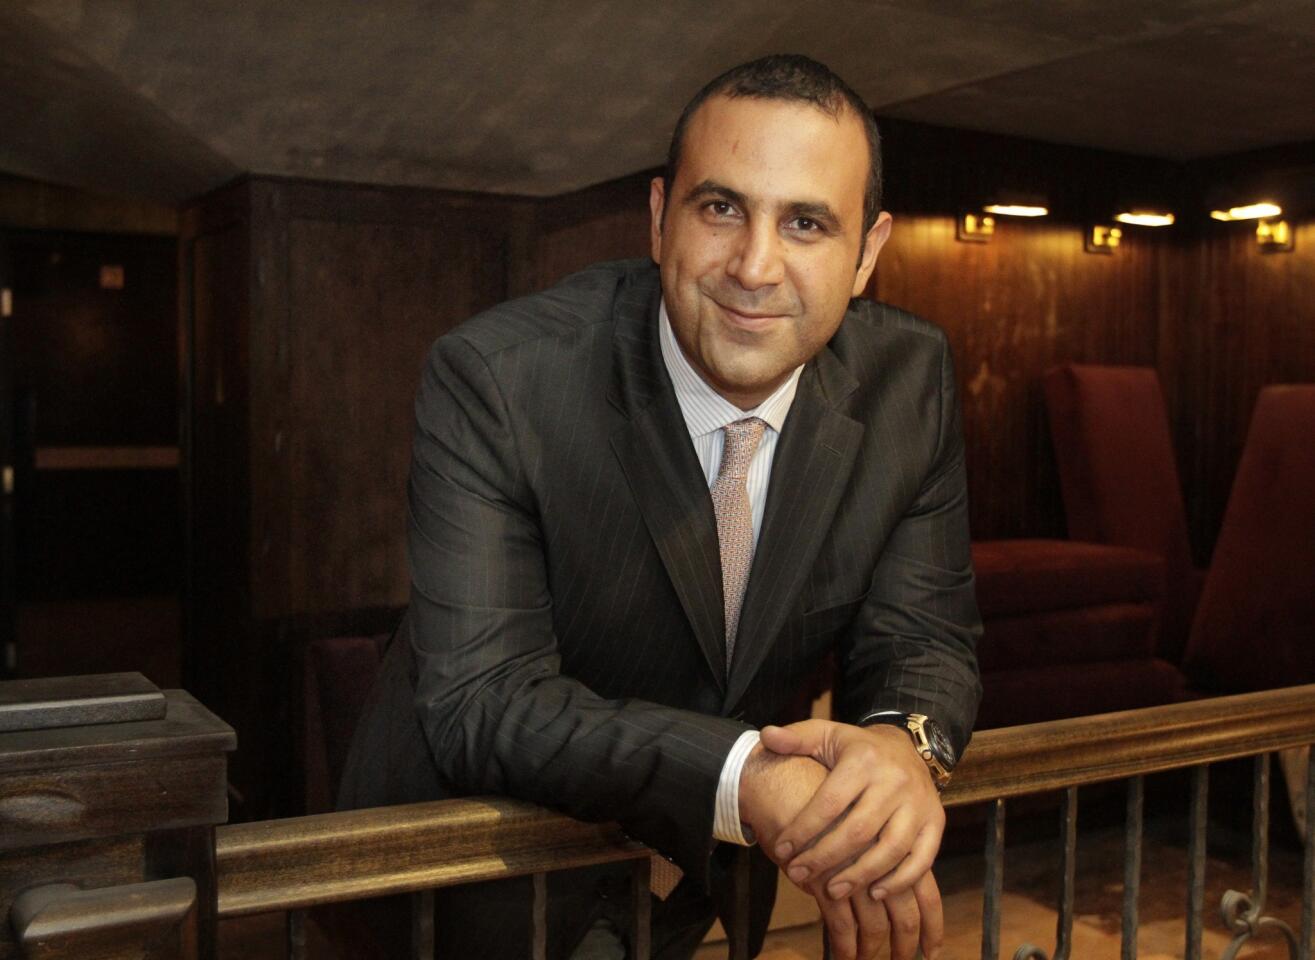 Sam Nazarian at the former MyHouse club space under reconstruction in Hollywood in December. Click through to see some of his many decadent restaurants, clubs and hotels.